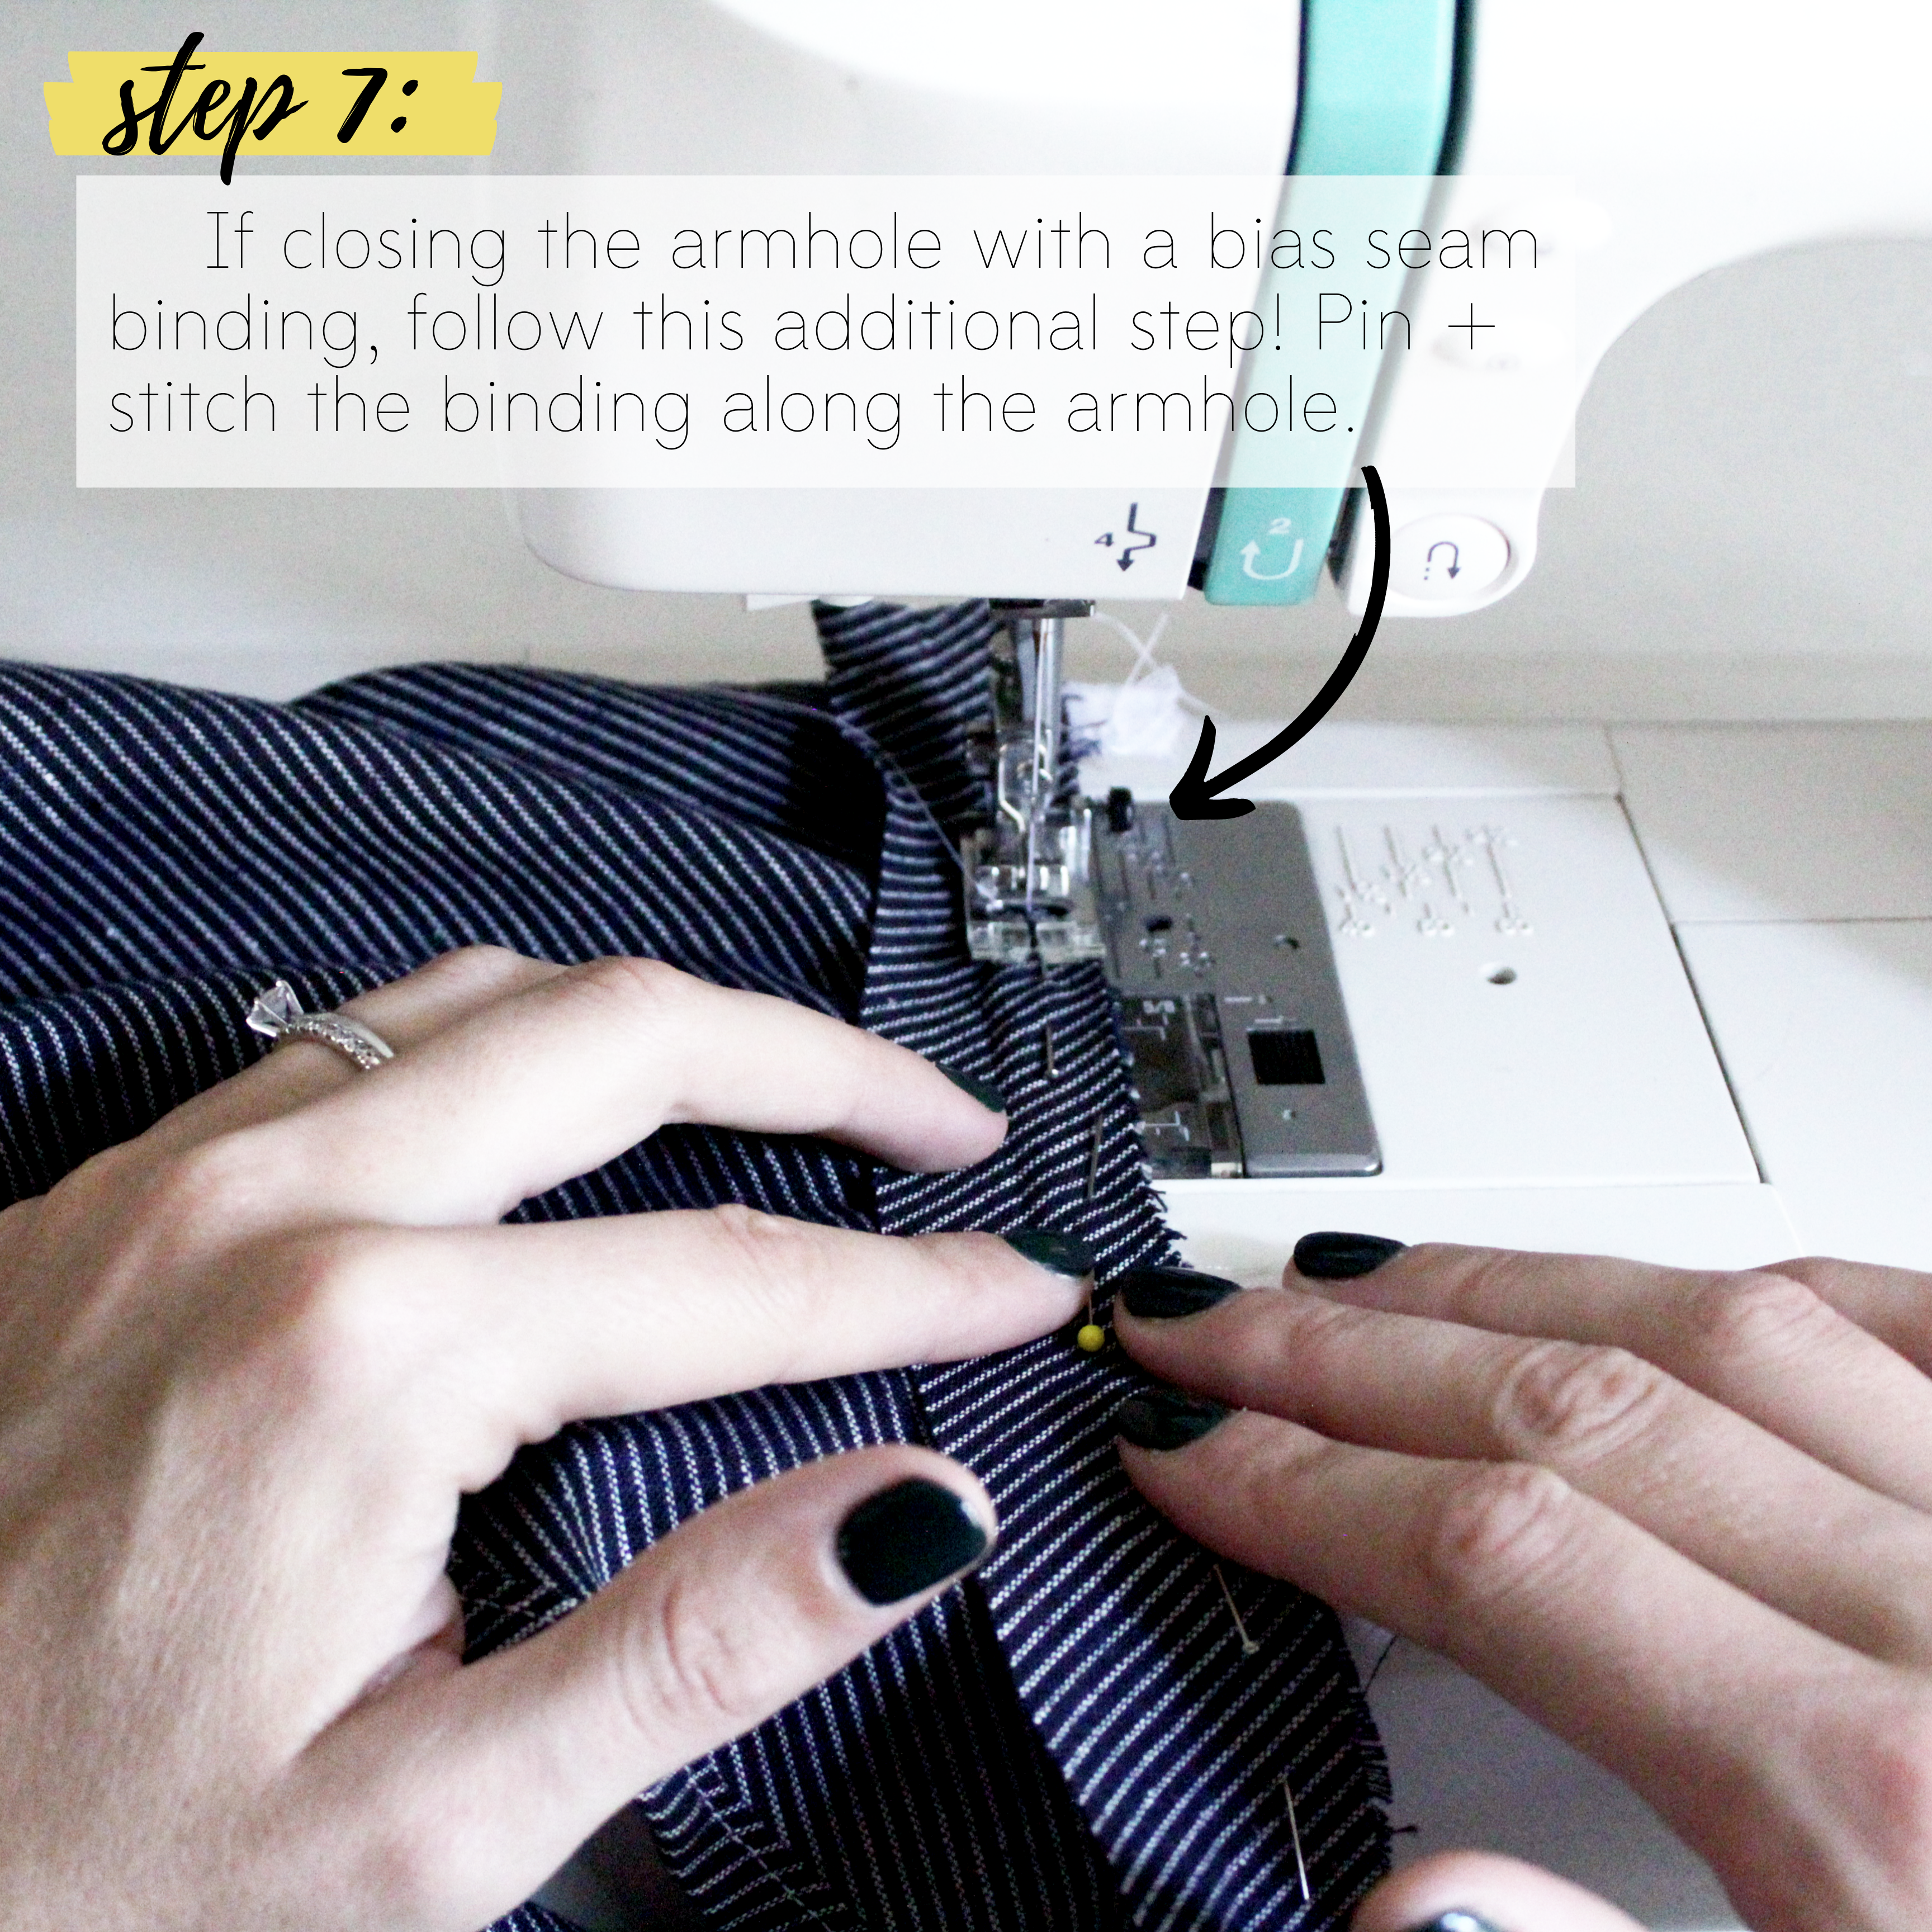 How To Sew An Invisible Zipper Sewing Tutorial: Step 7